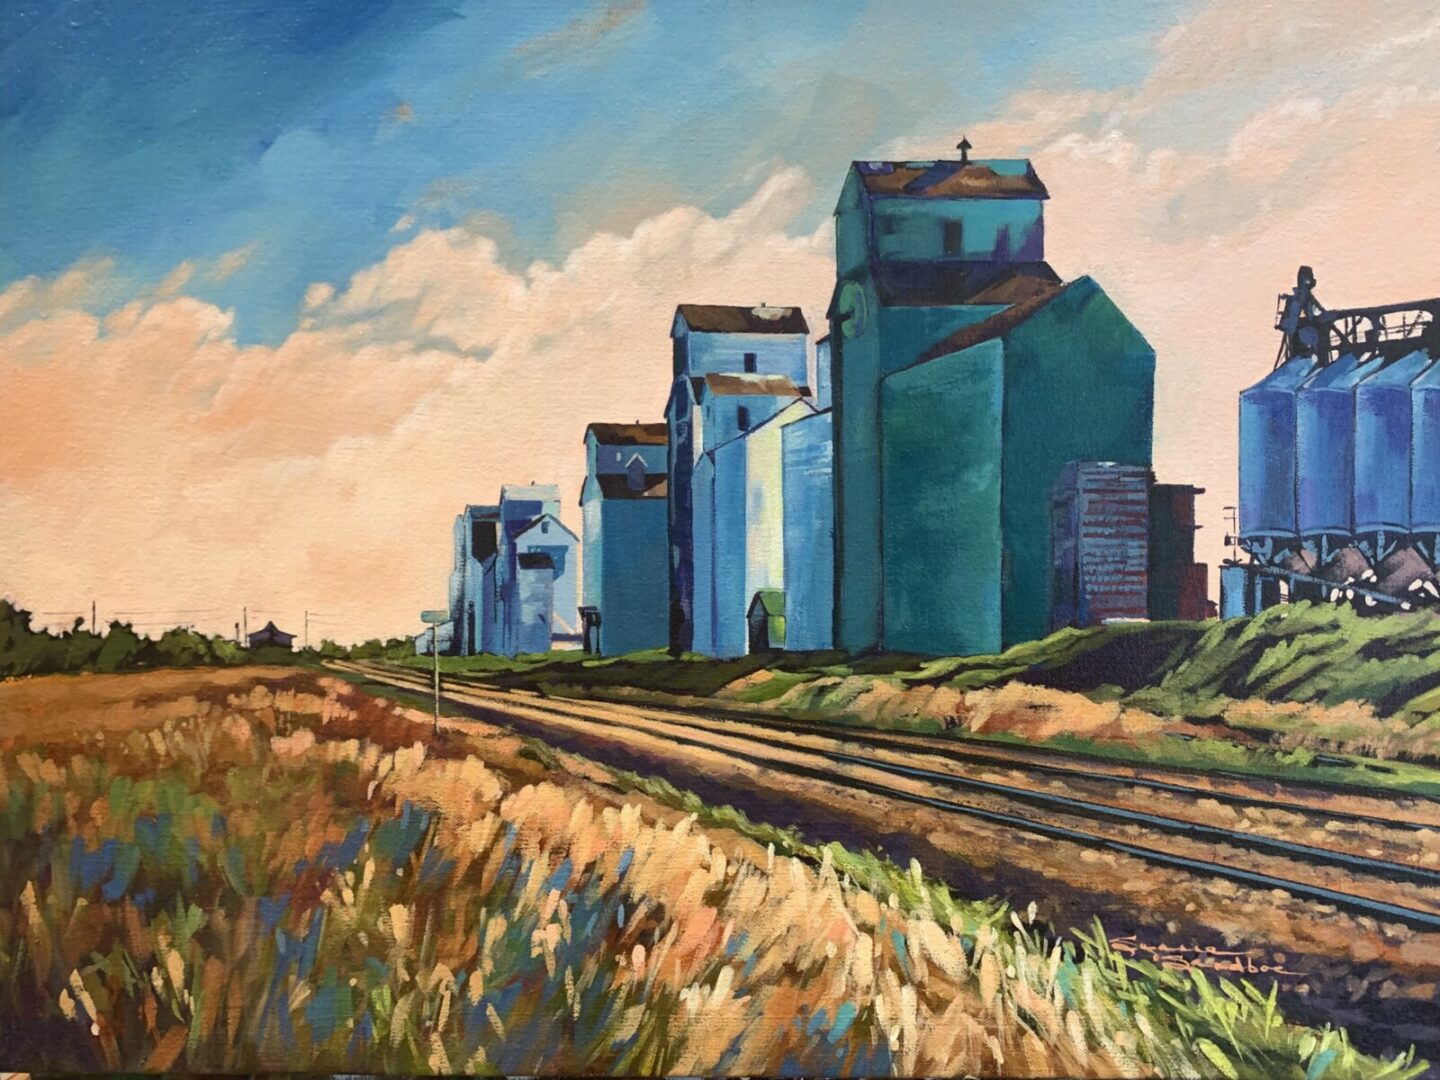 Down The Rail, 18x24, Acrylic, 2021, Suzanne Sandboe, Donated to Sexsmith Museum Elevator Fundraiser